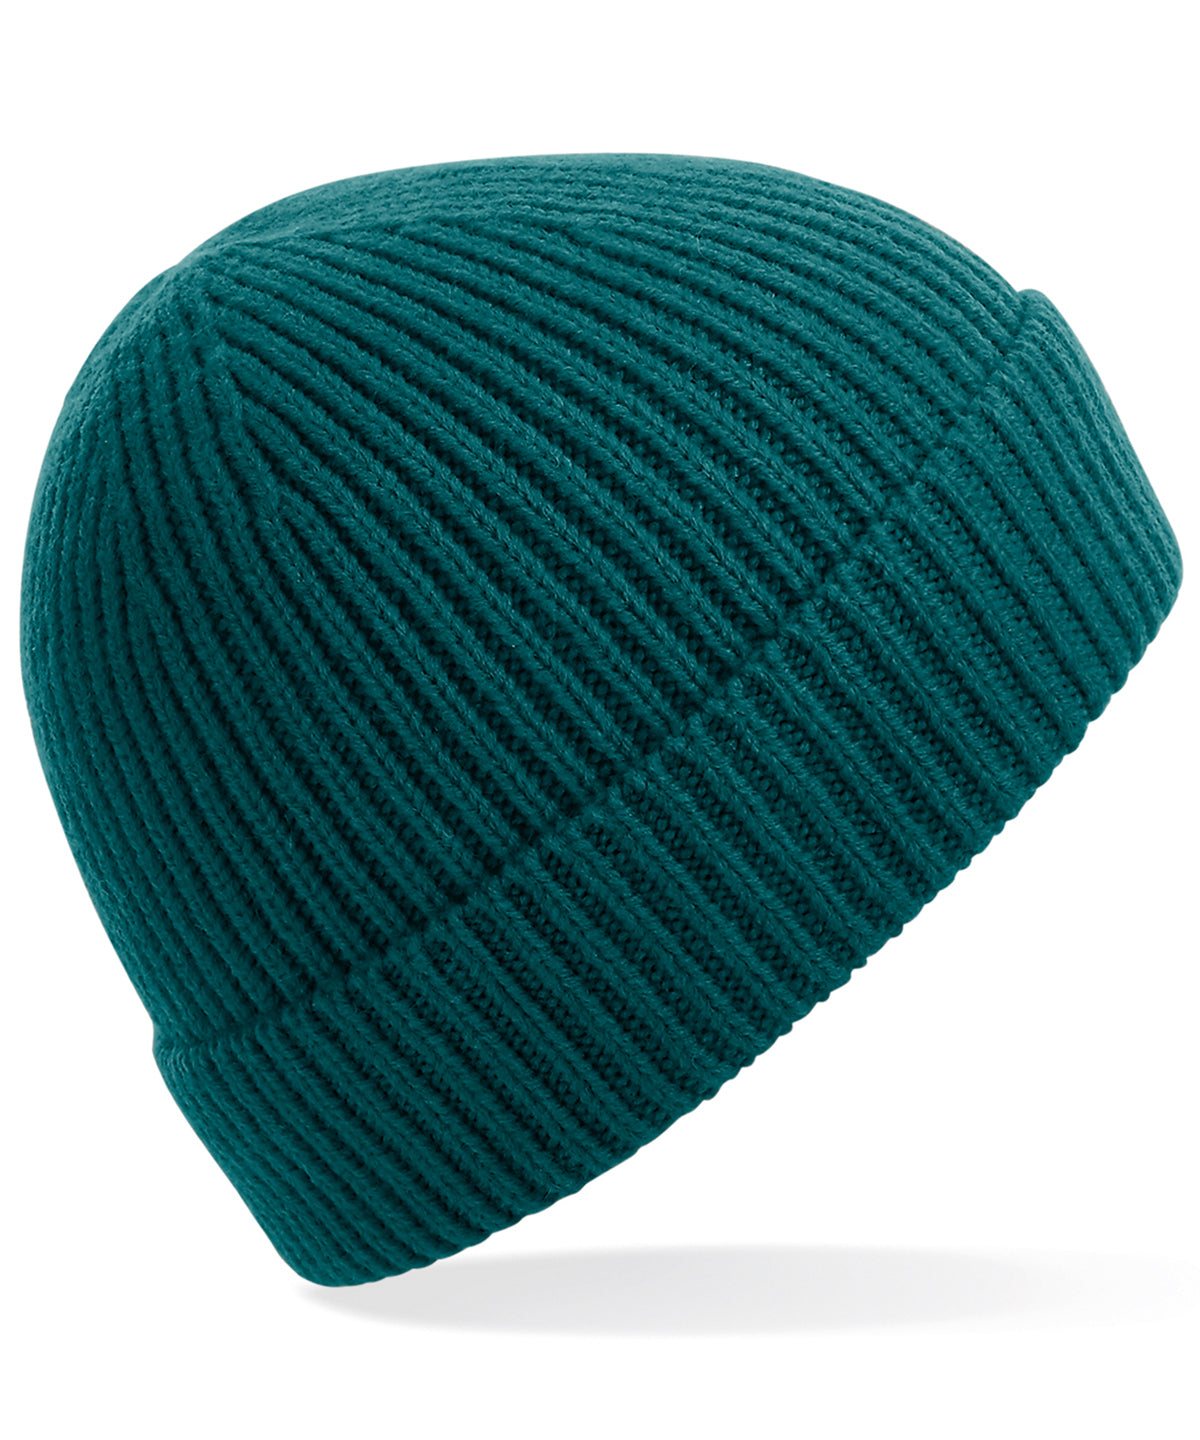 Personalised Hats - Teal Beechfield Engineered knit ribbed beanie